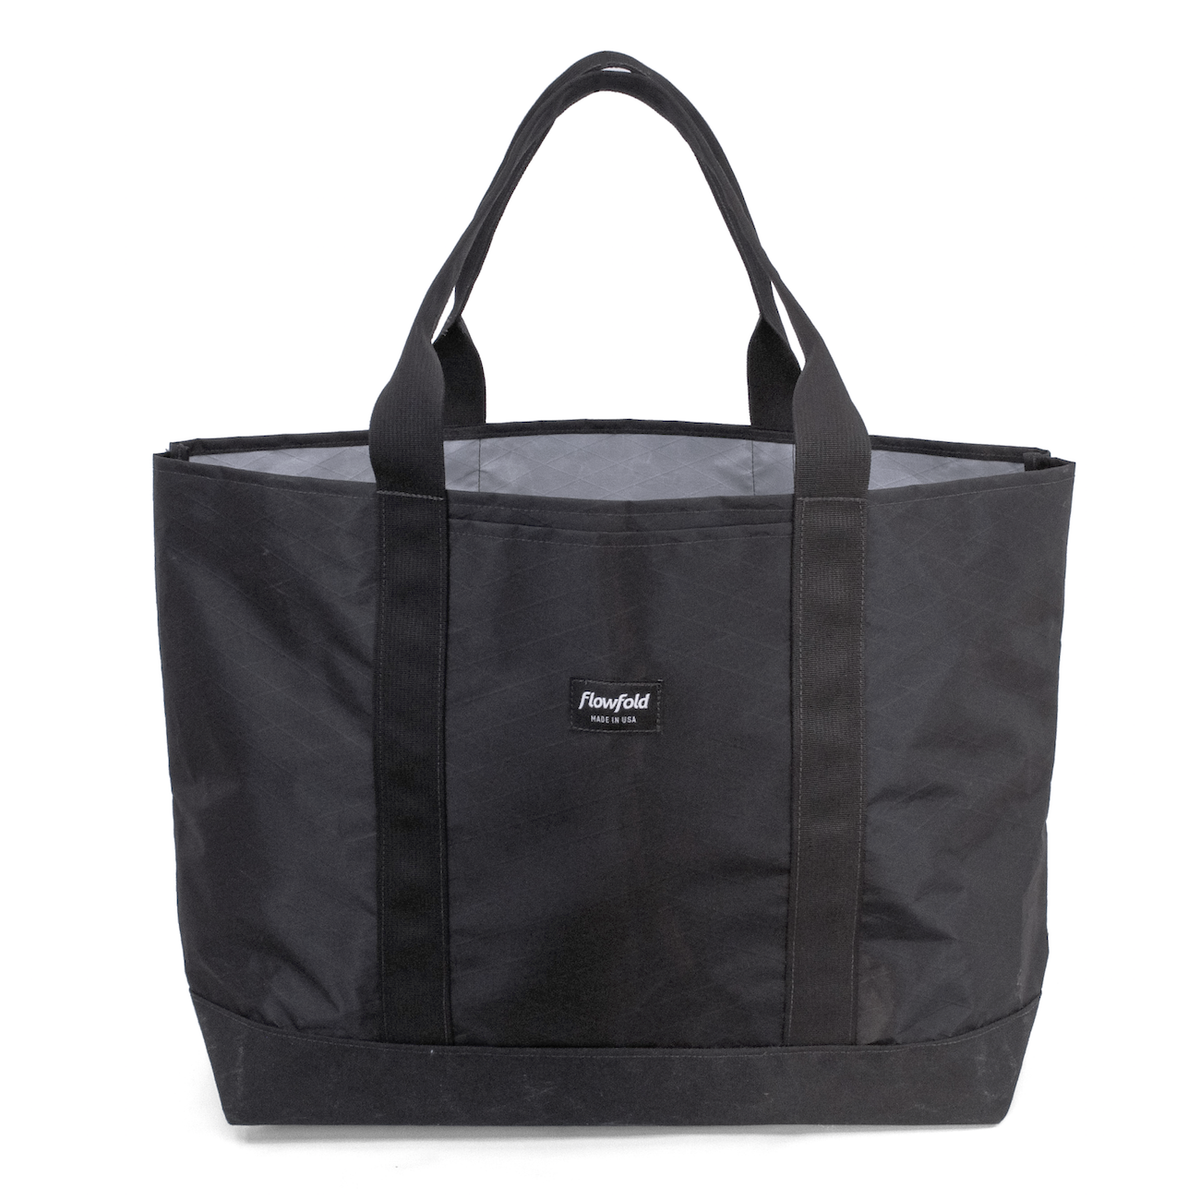 Flowfold Mammoth Tote - Lightweight 28L Tote Bag